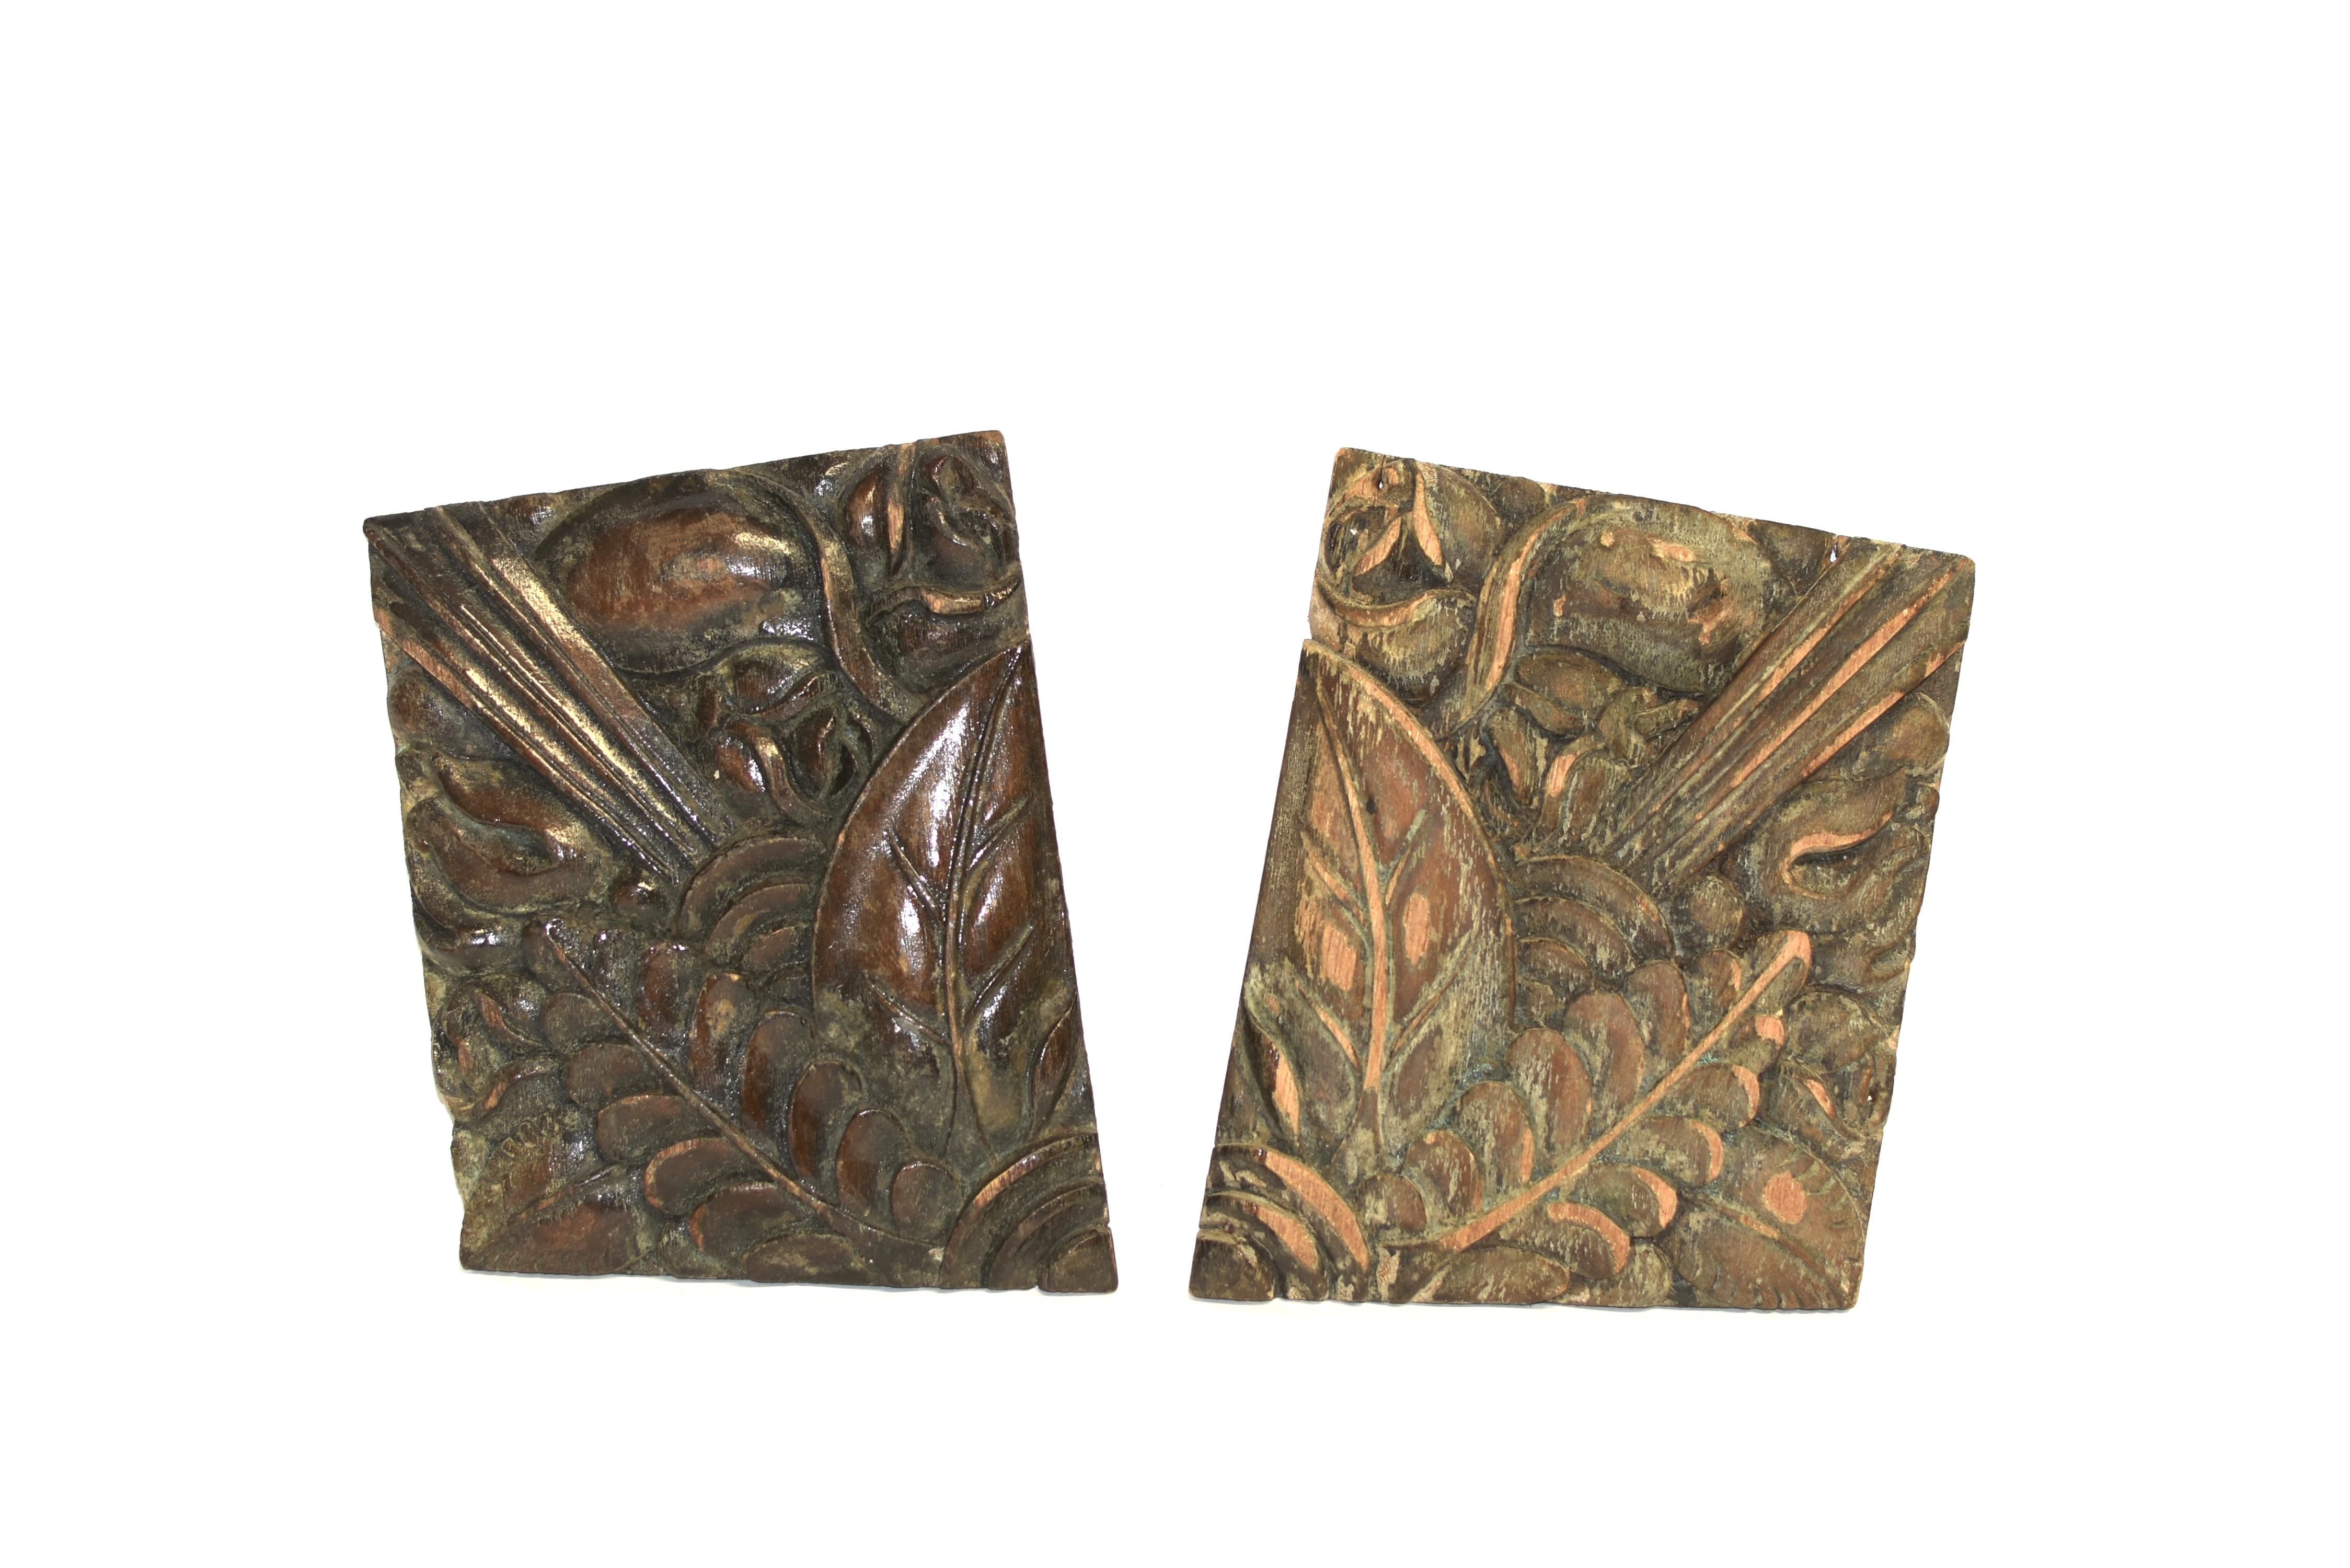 A pair of wood fragments carved in high relief with overlapping leaves of magnolia and mimosa, fronting blossoms of magnolia and reeded fractions of columns. Hand carved, solid wood, from the Chinese republic era.